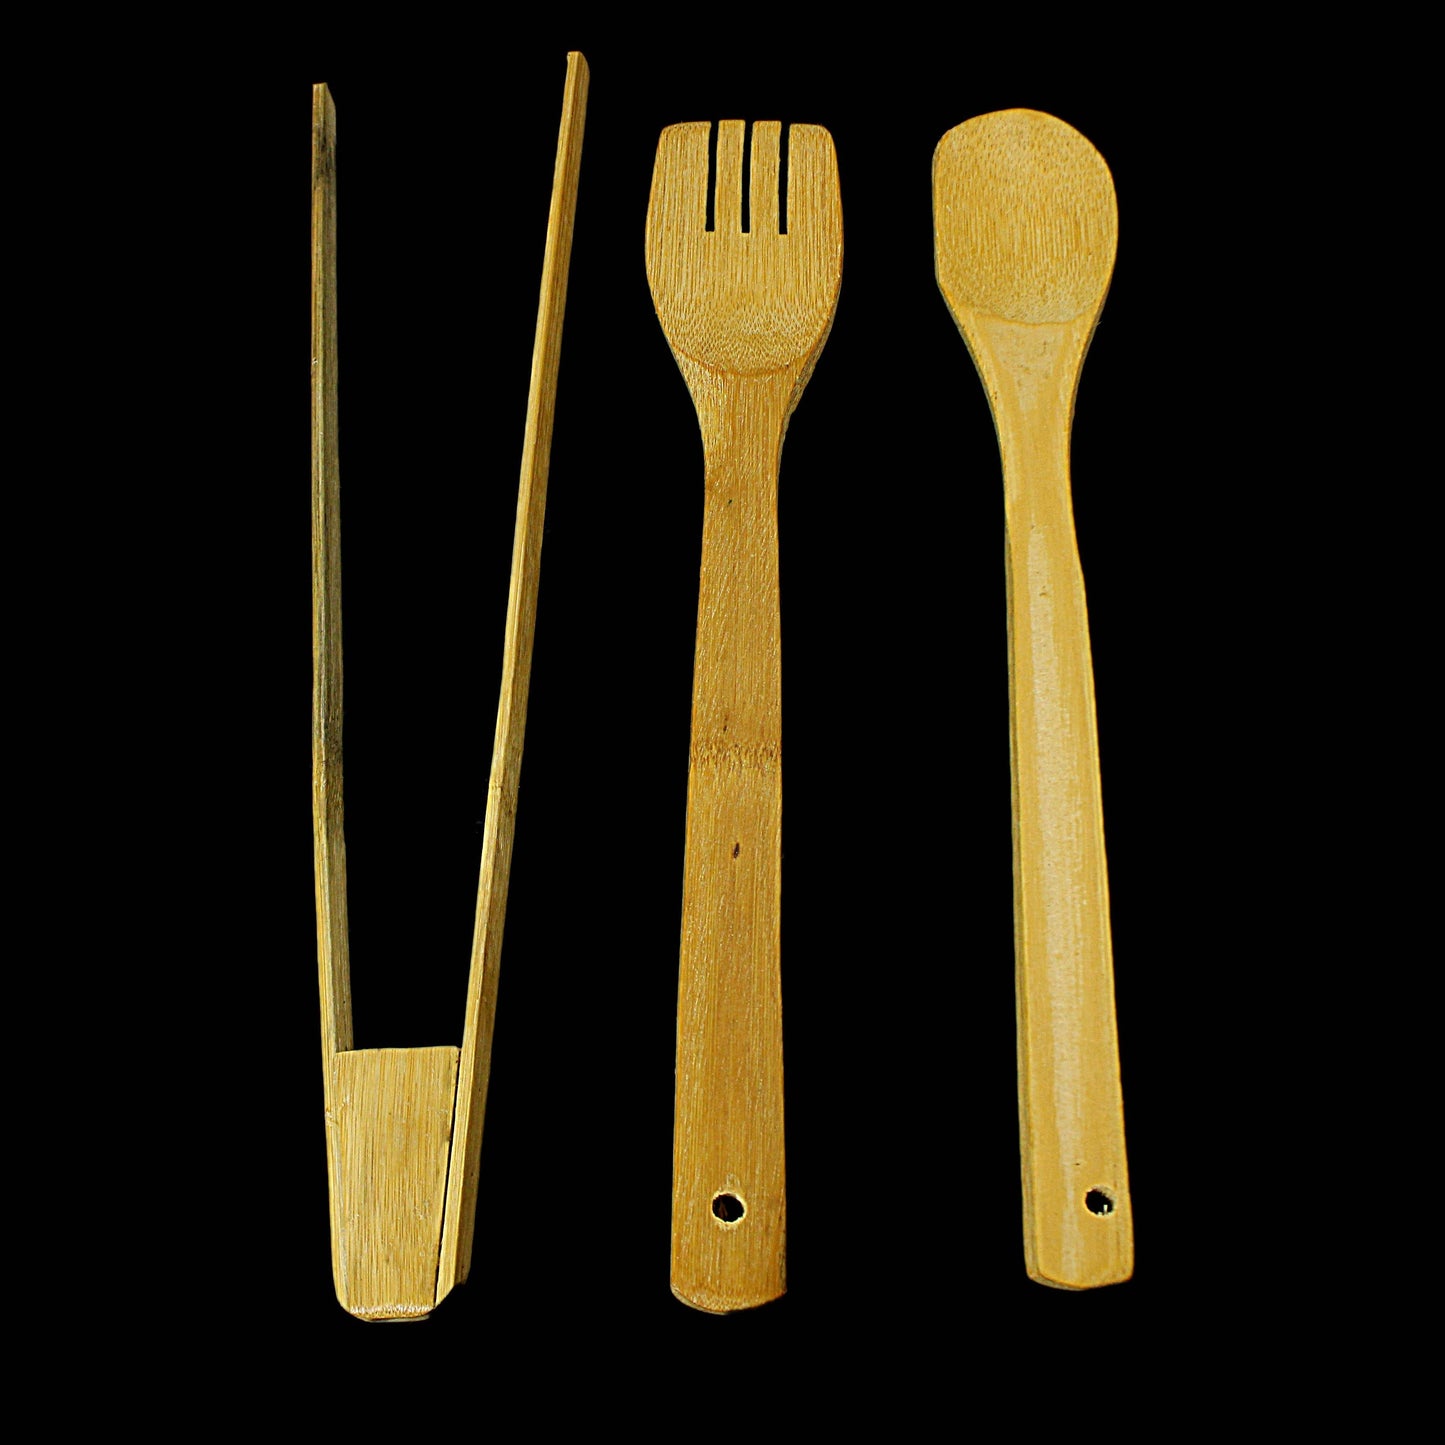 Wooden Bamboo Kitchen Utensils Set of 3 00301 (Parcel Rate)